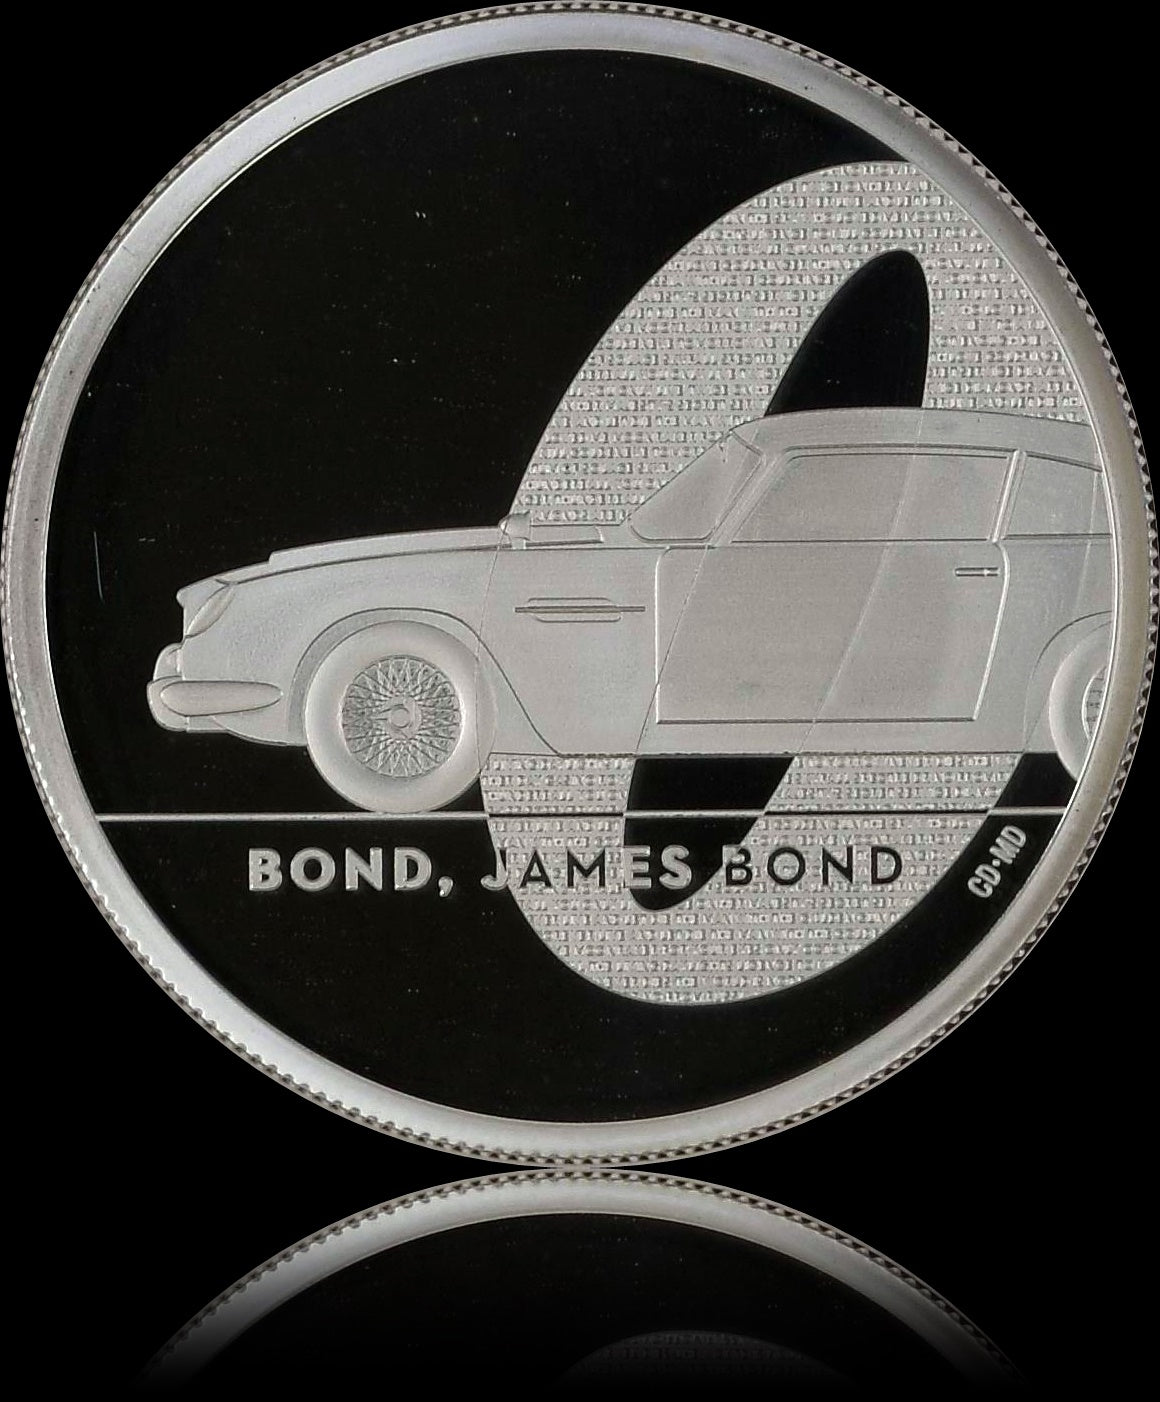 NO TIME TO DIE, James Bond series, 2 oz Silver 5£, Proof PF 69, 2020